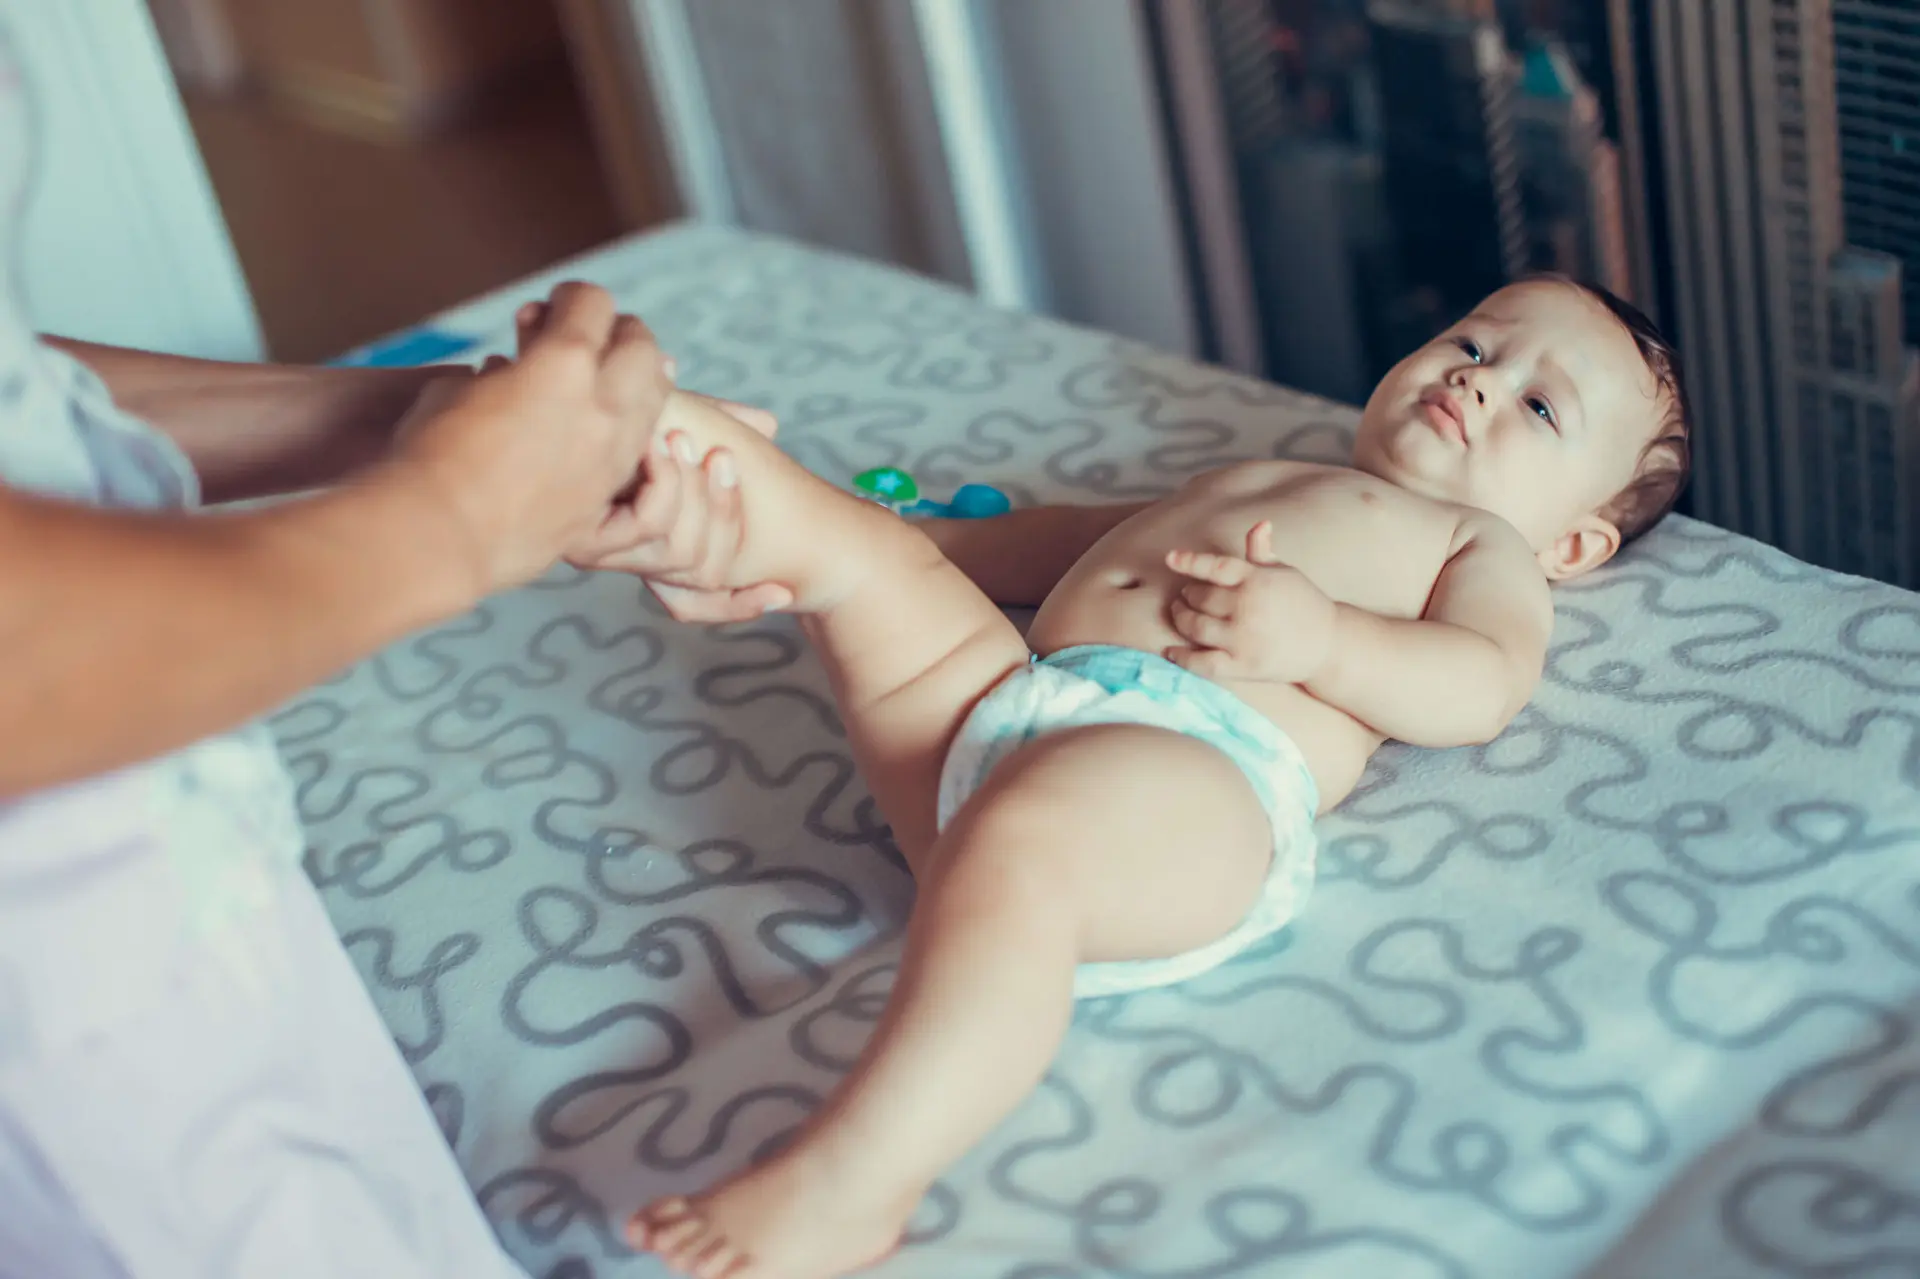 a baby in a diaper lays down on a patterned blanket while being examined by a doctor